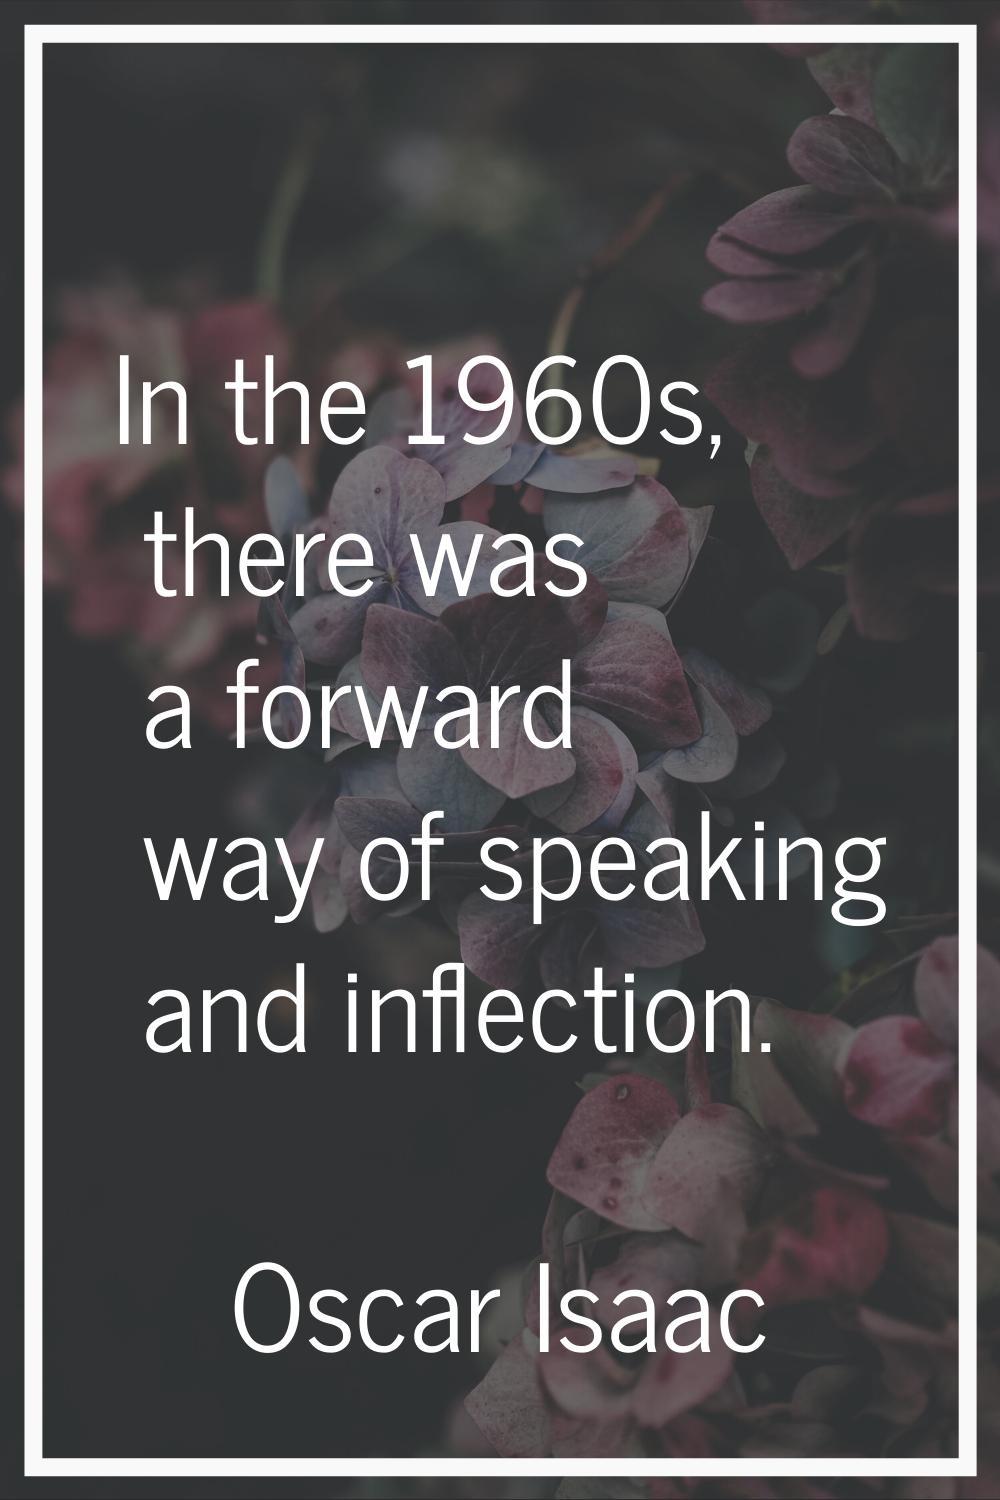 In the 1960s, there was a forward way of speaking and inflection.